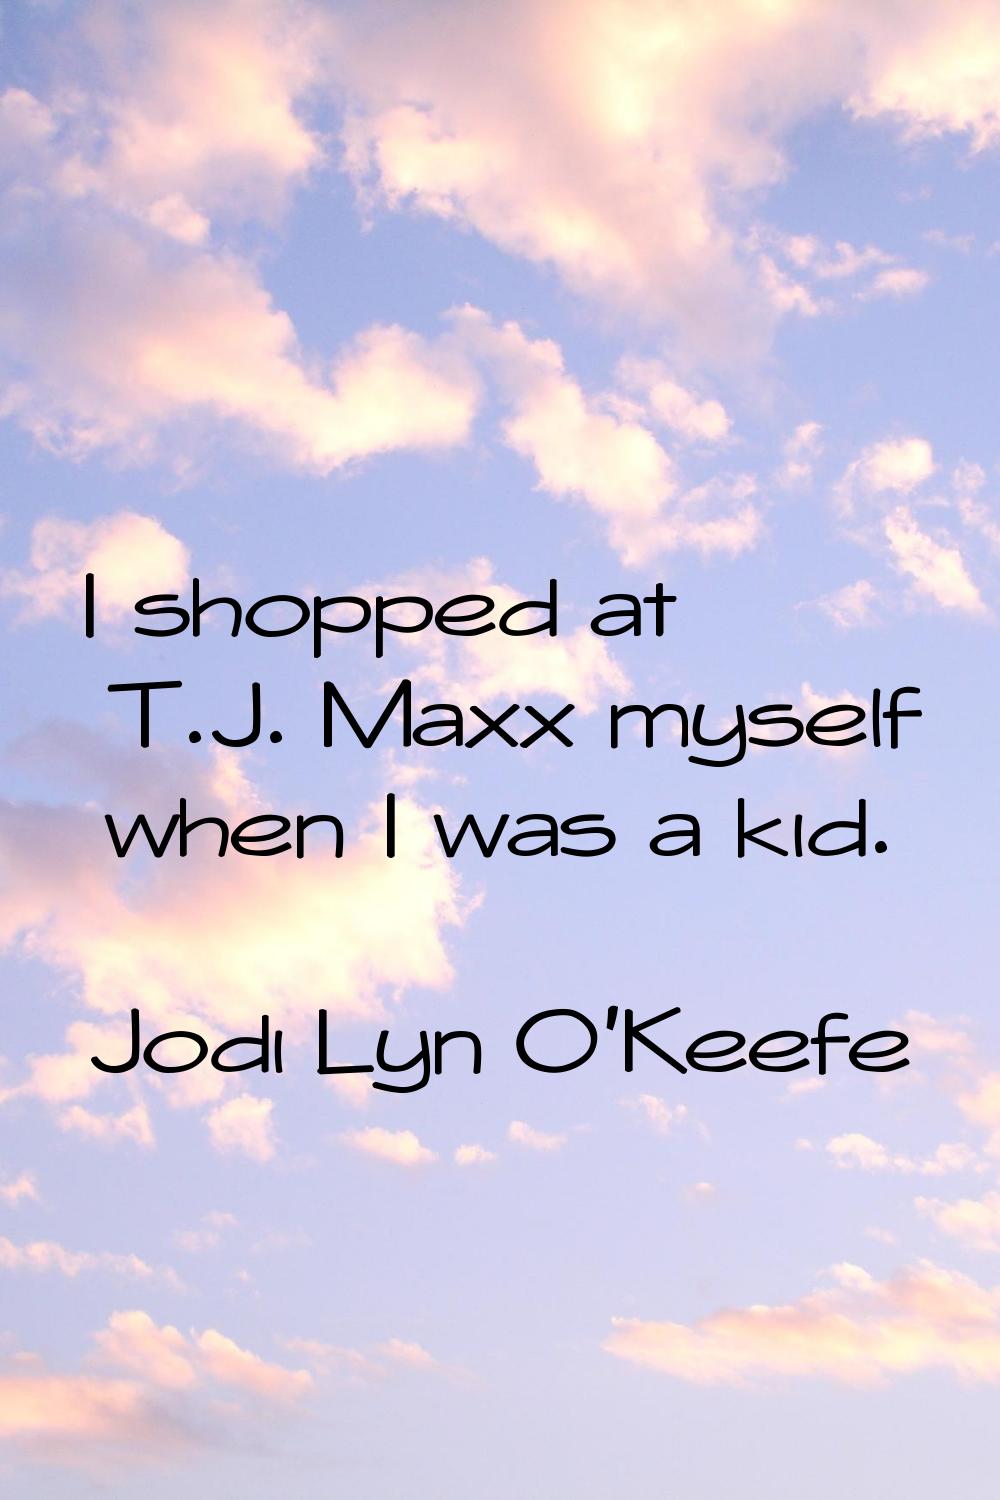 I shopped at T.J. Maxx myself when I was a kid.